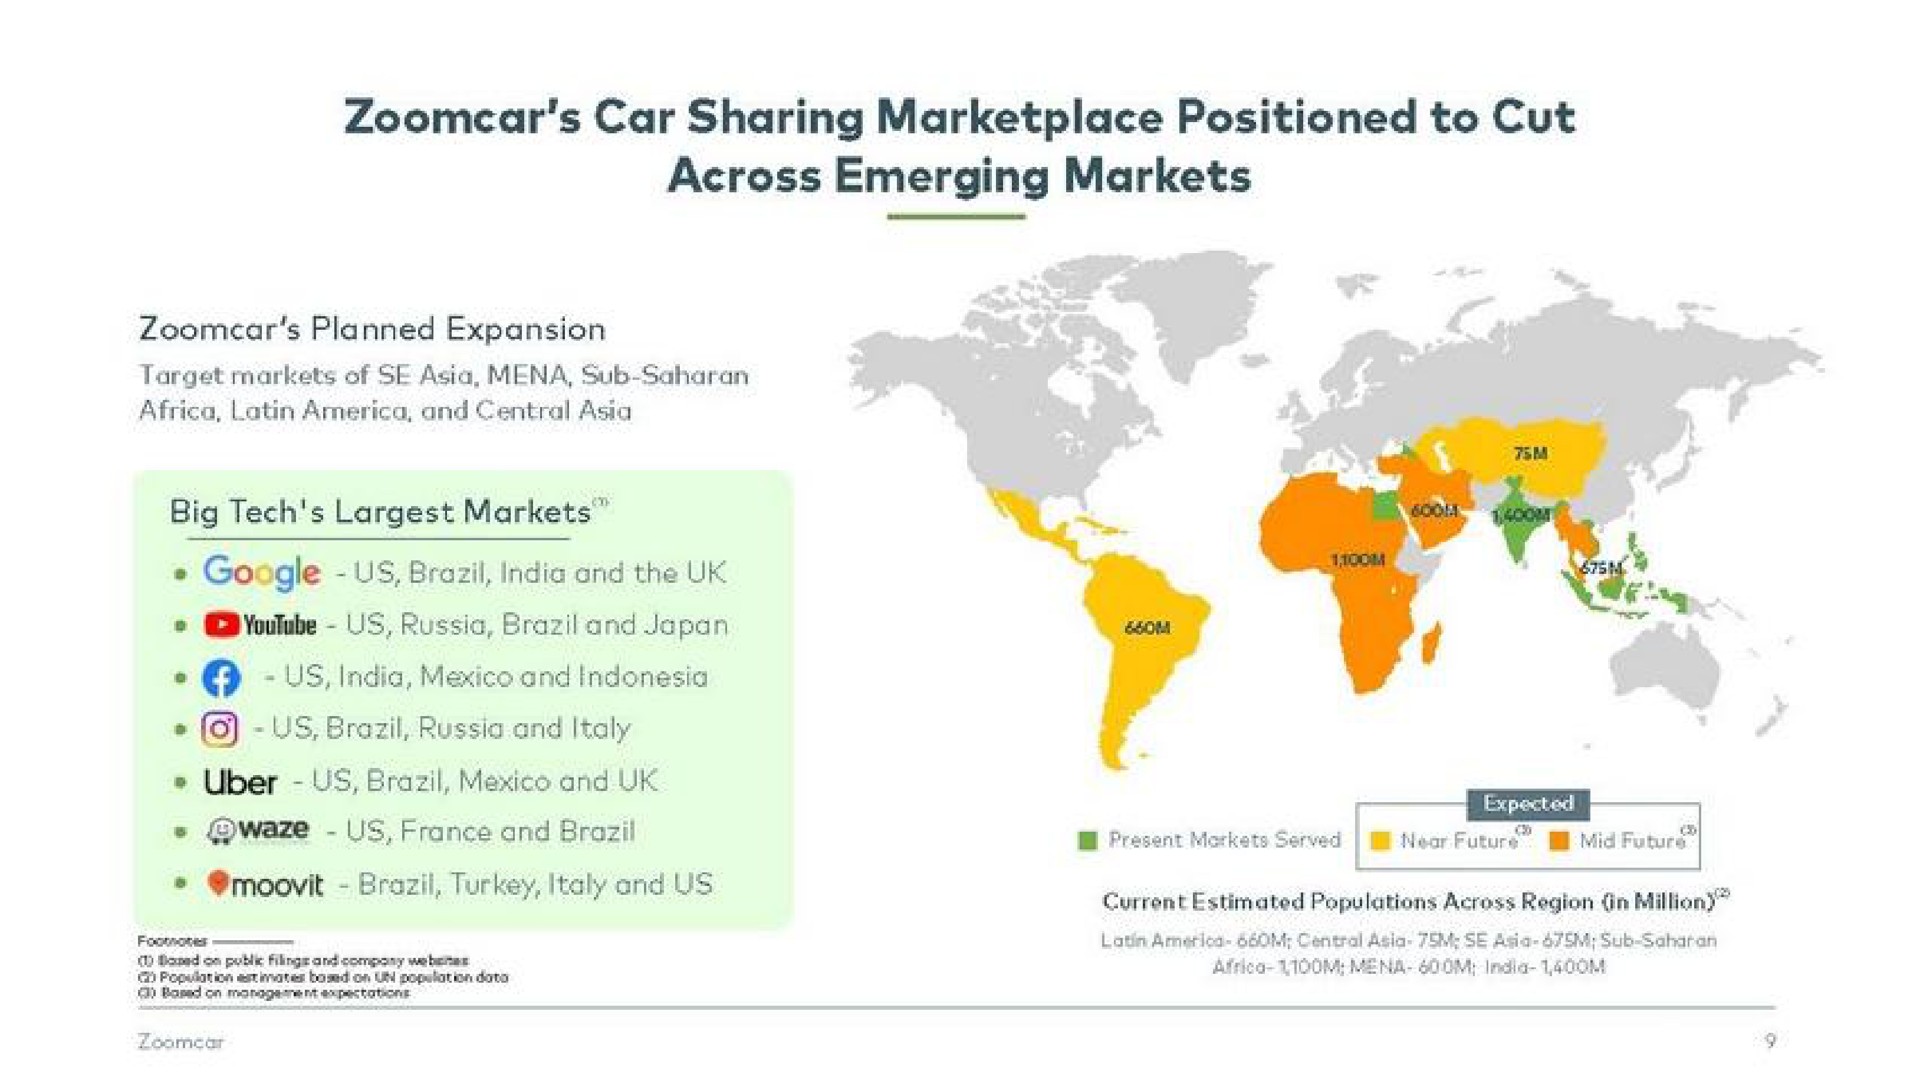 car sharing positioned to cut across emerging markets | Zoomcar